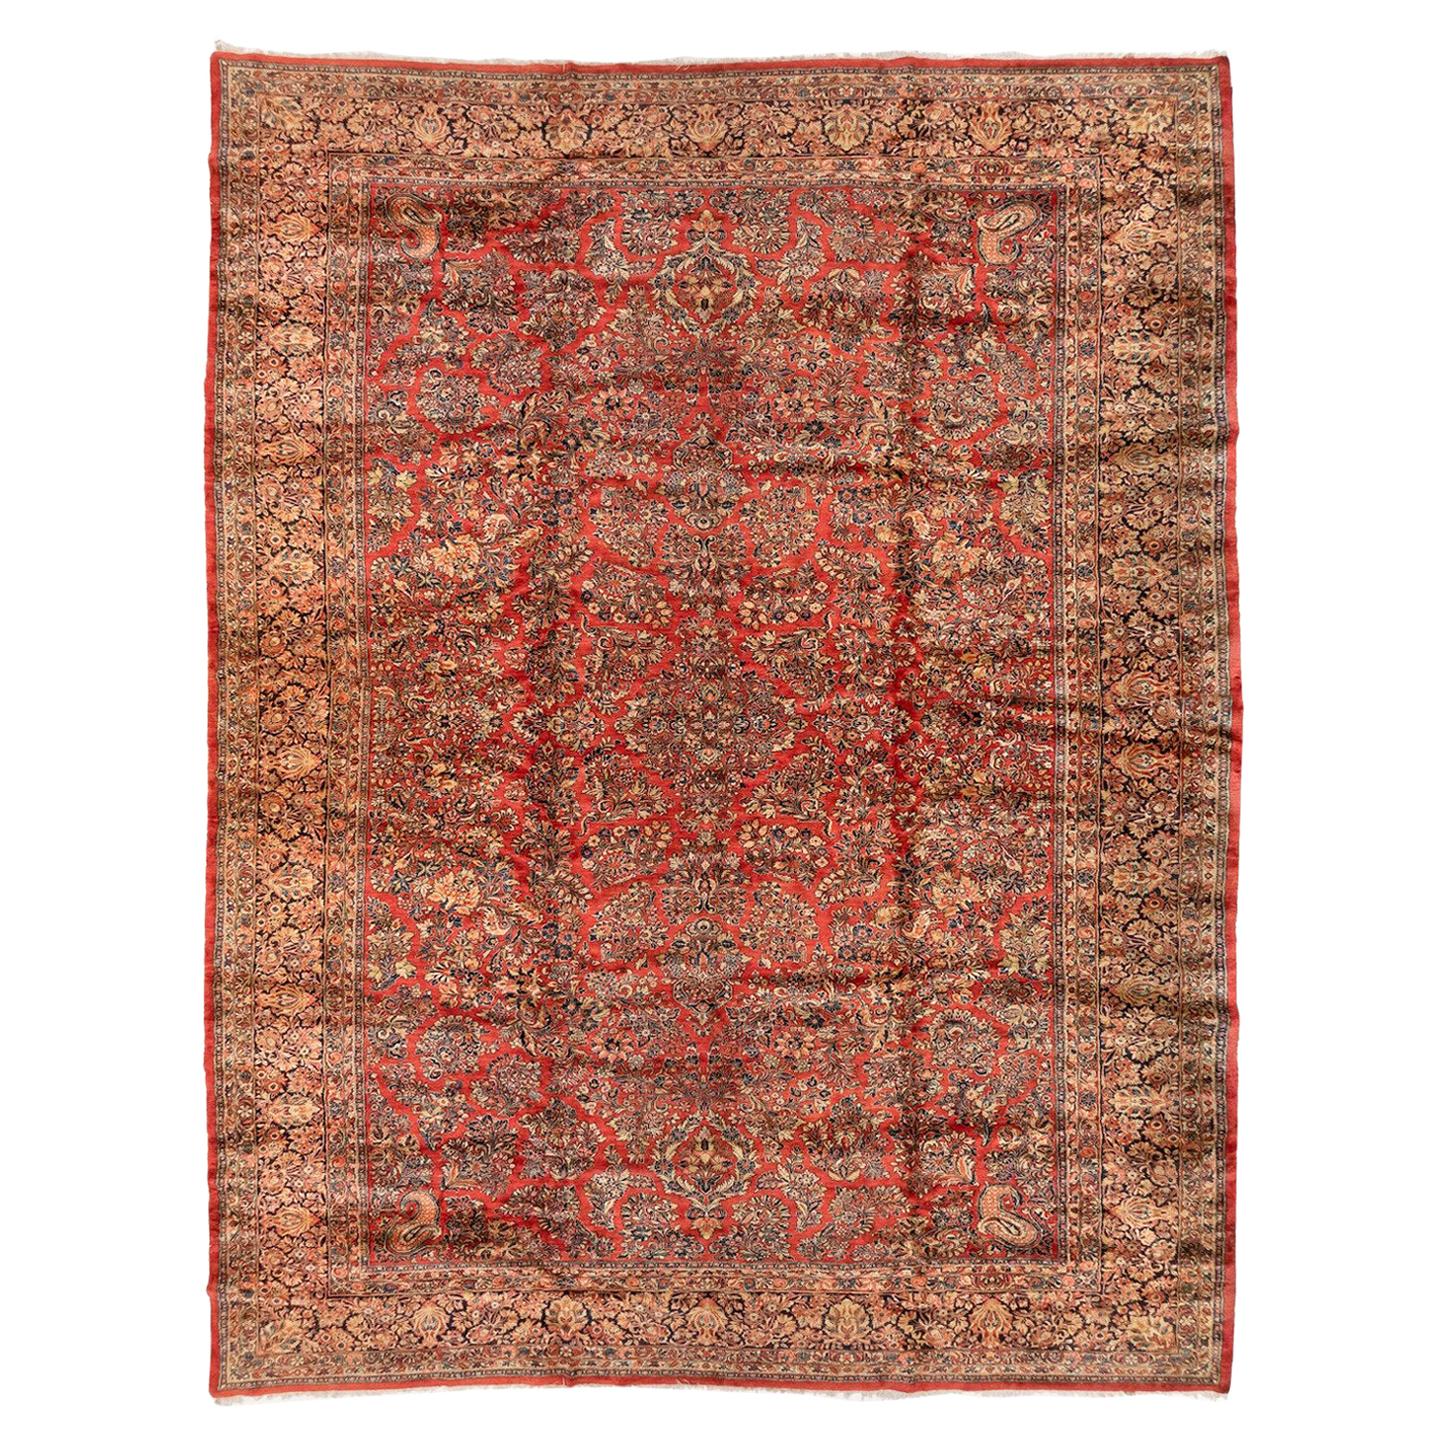 Antique Large Oversize Persian Red Floral Sarouk Rug, c. 1920s For Sale